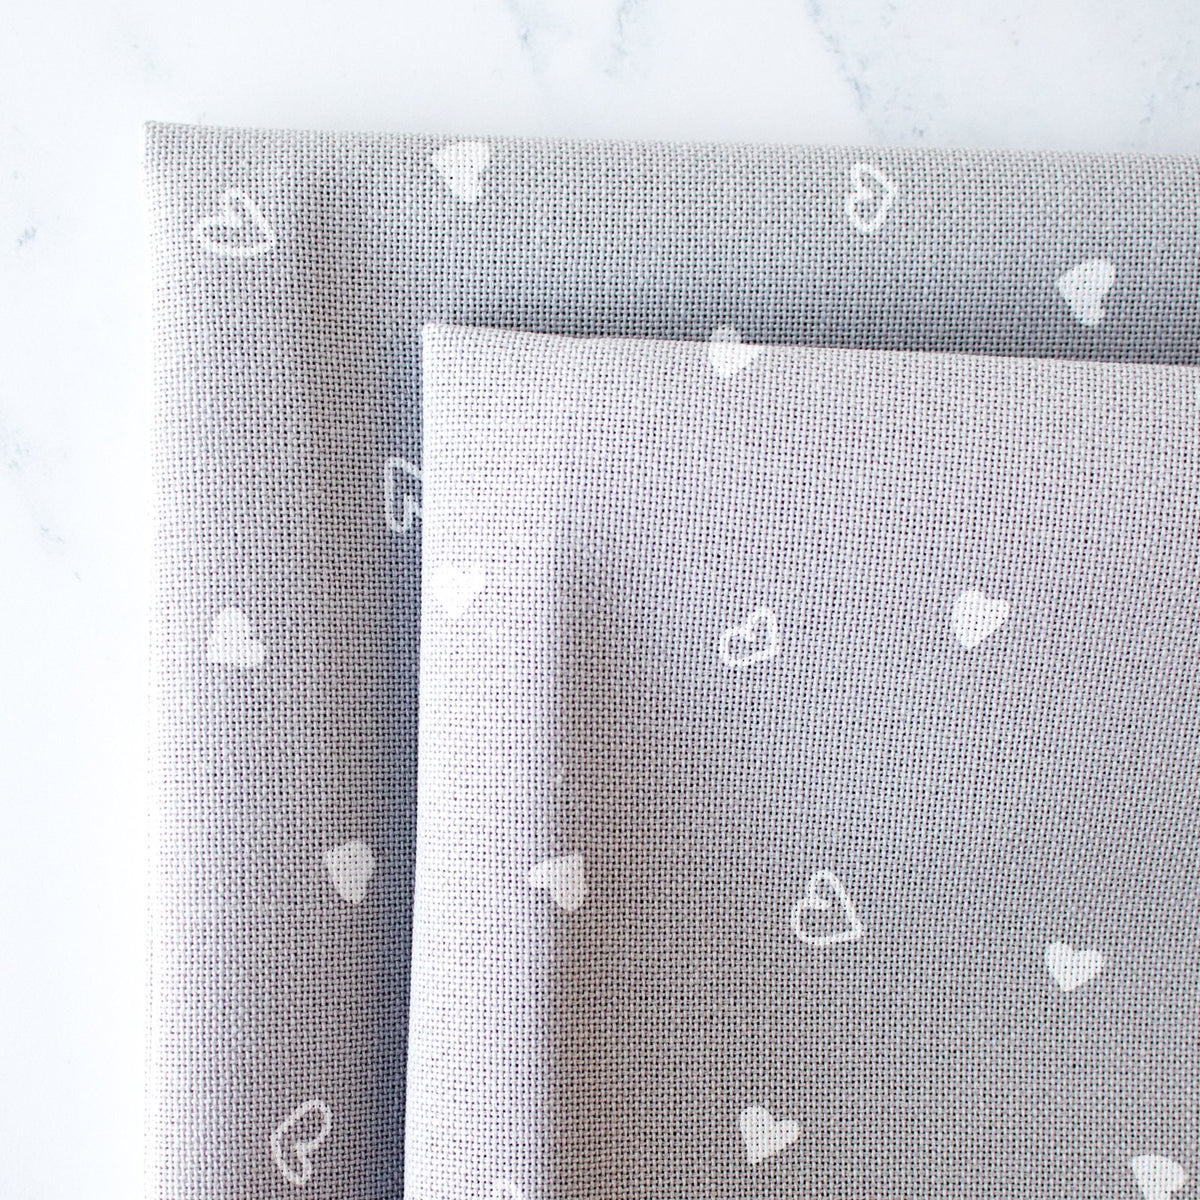 Gray Evenweave Fabric with White Hearts - 32 Count